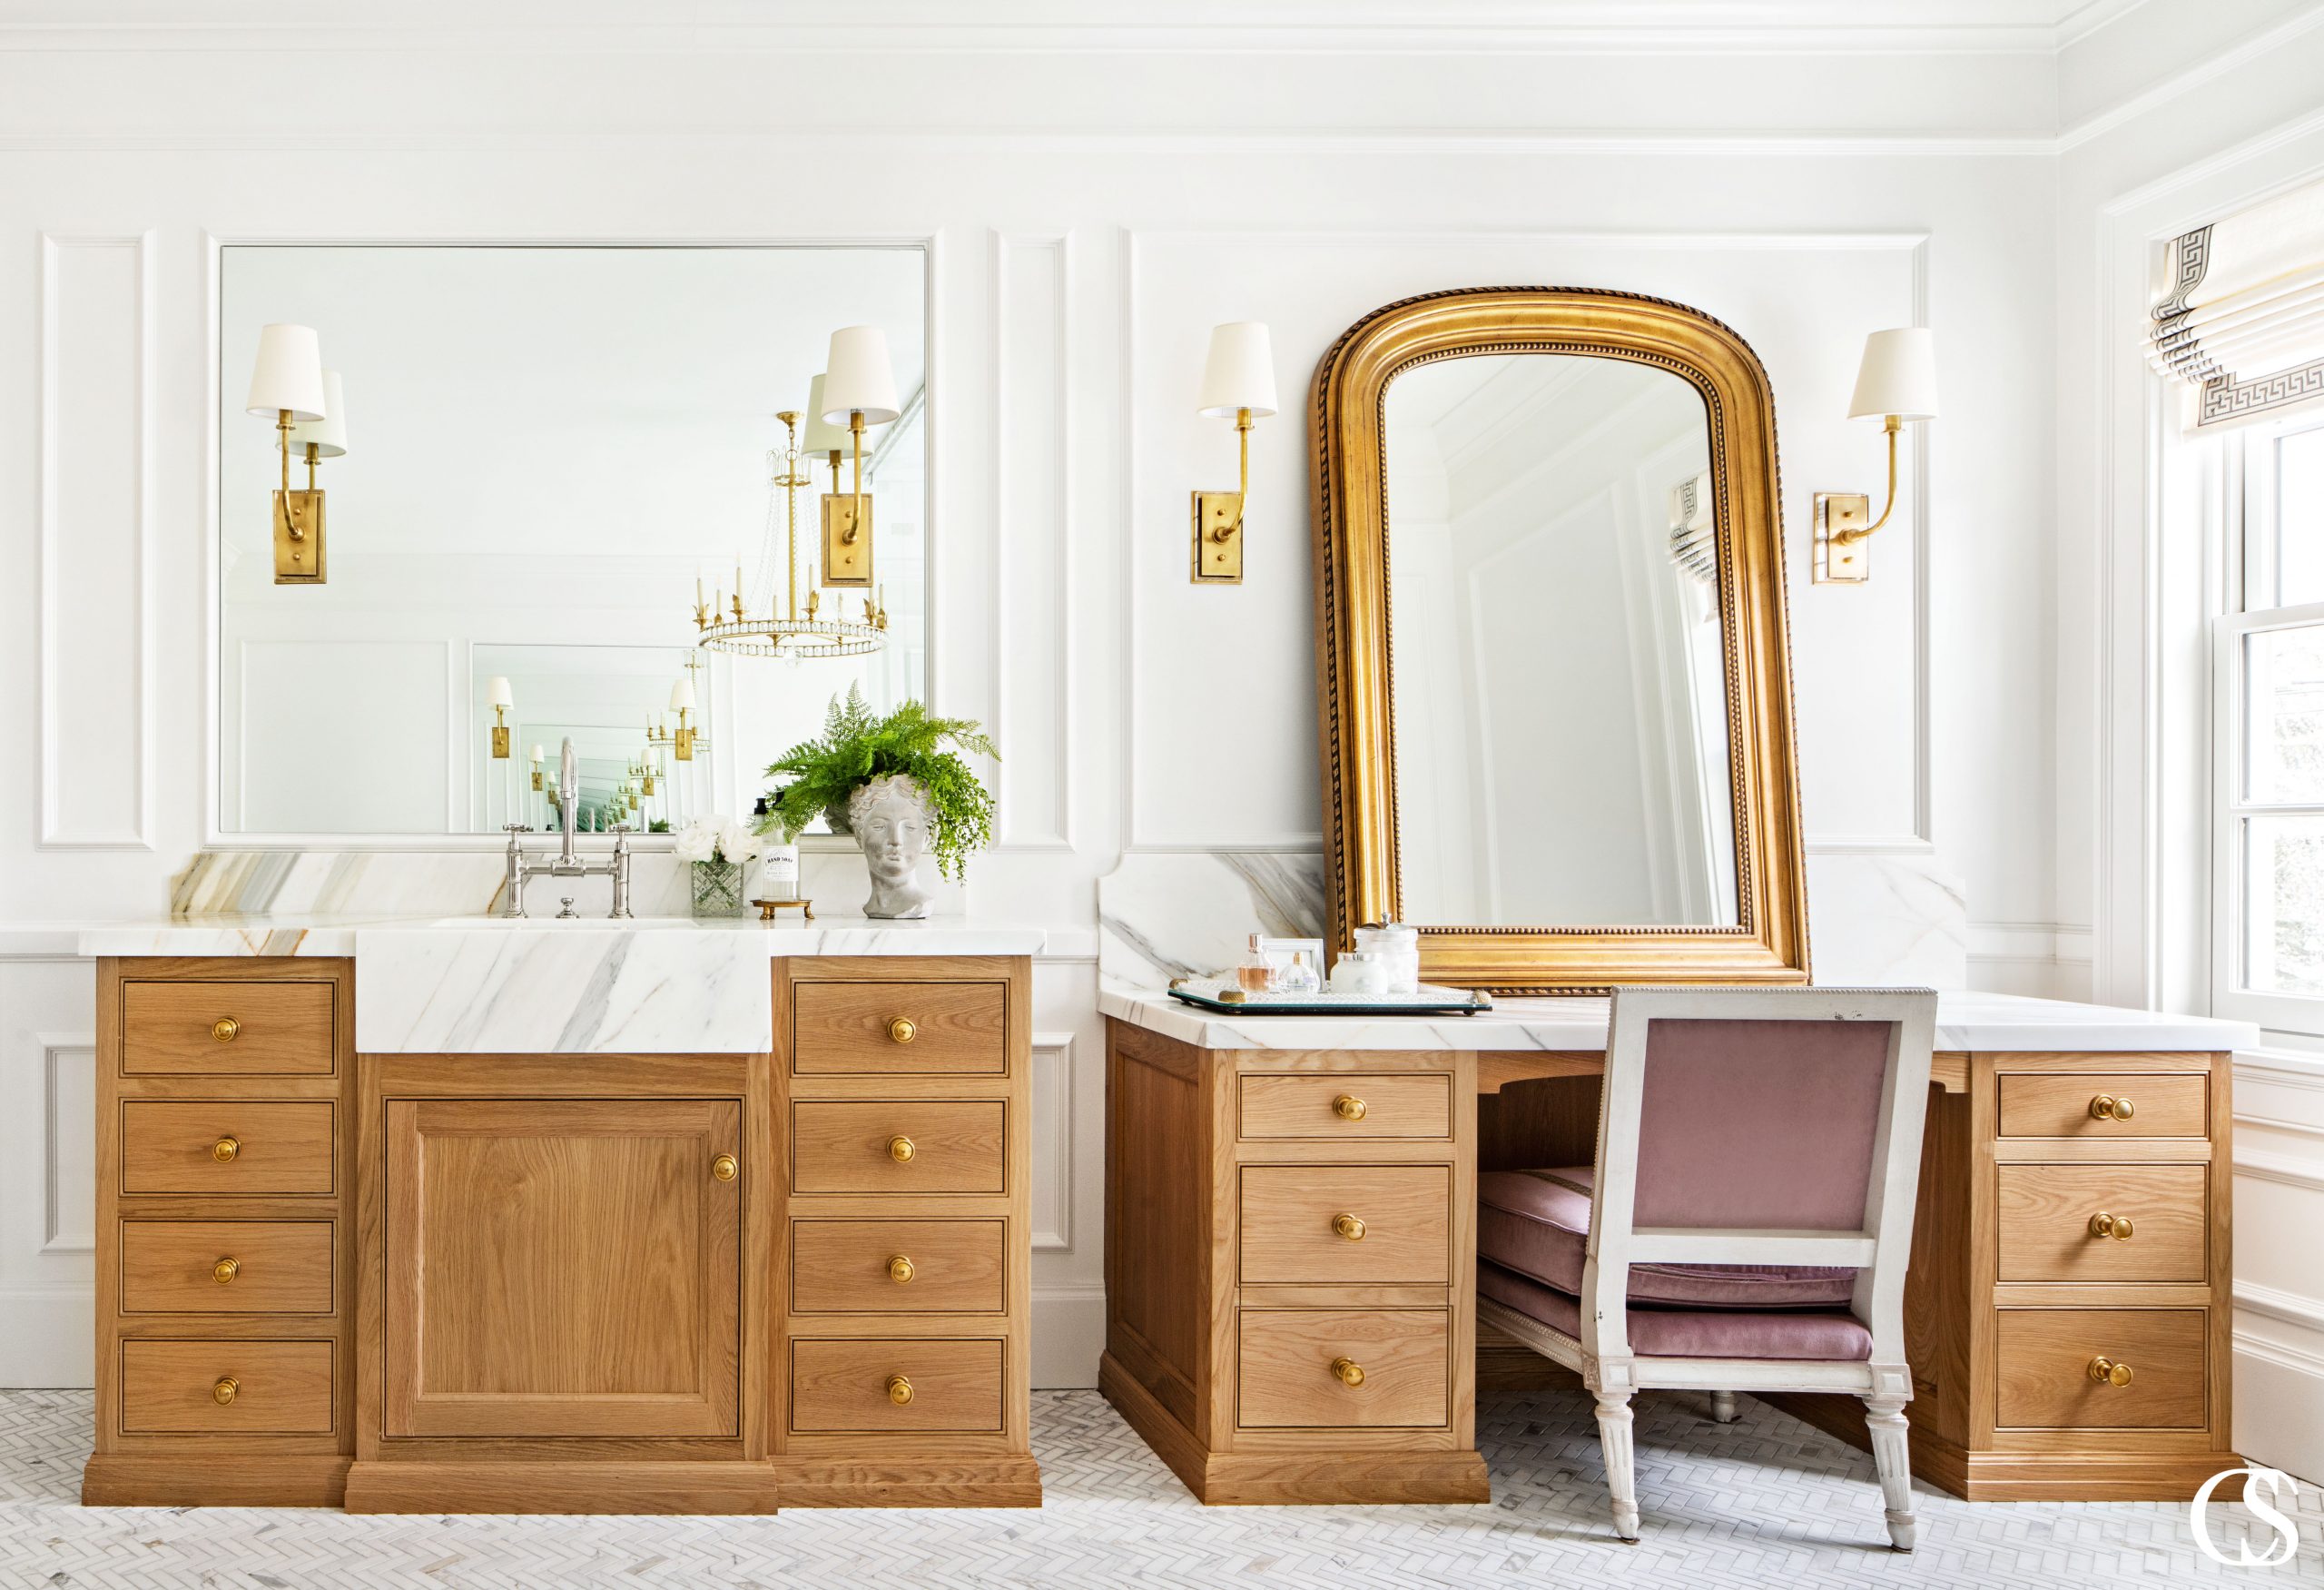 These custom bathroom cabinets feel luxurious stain color to marble countertops.